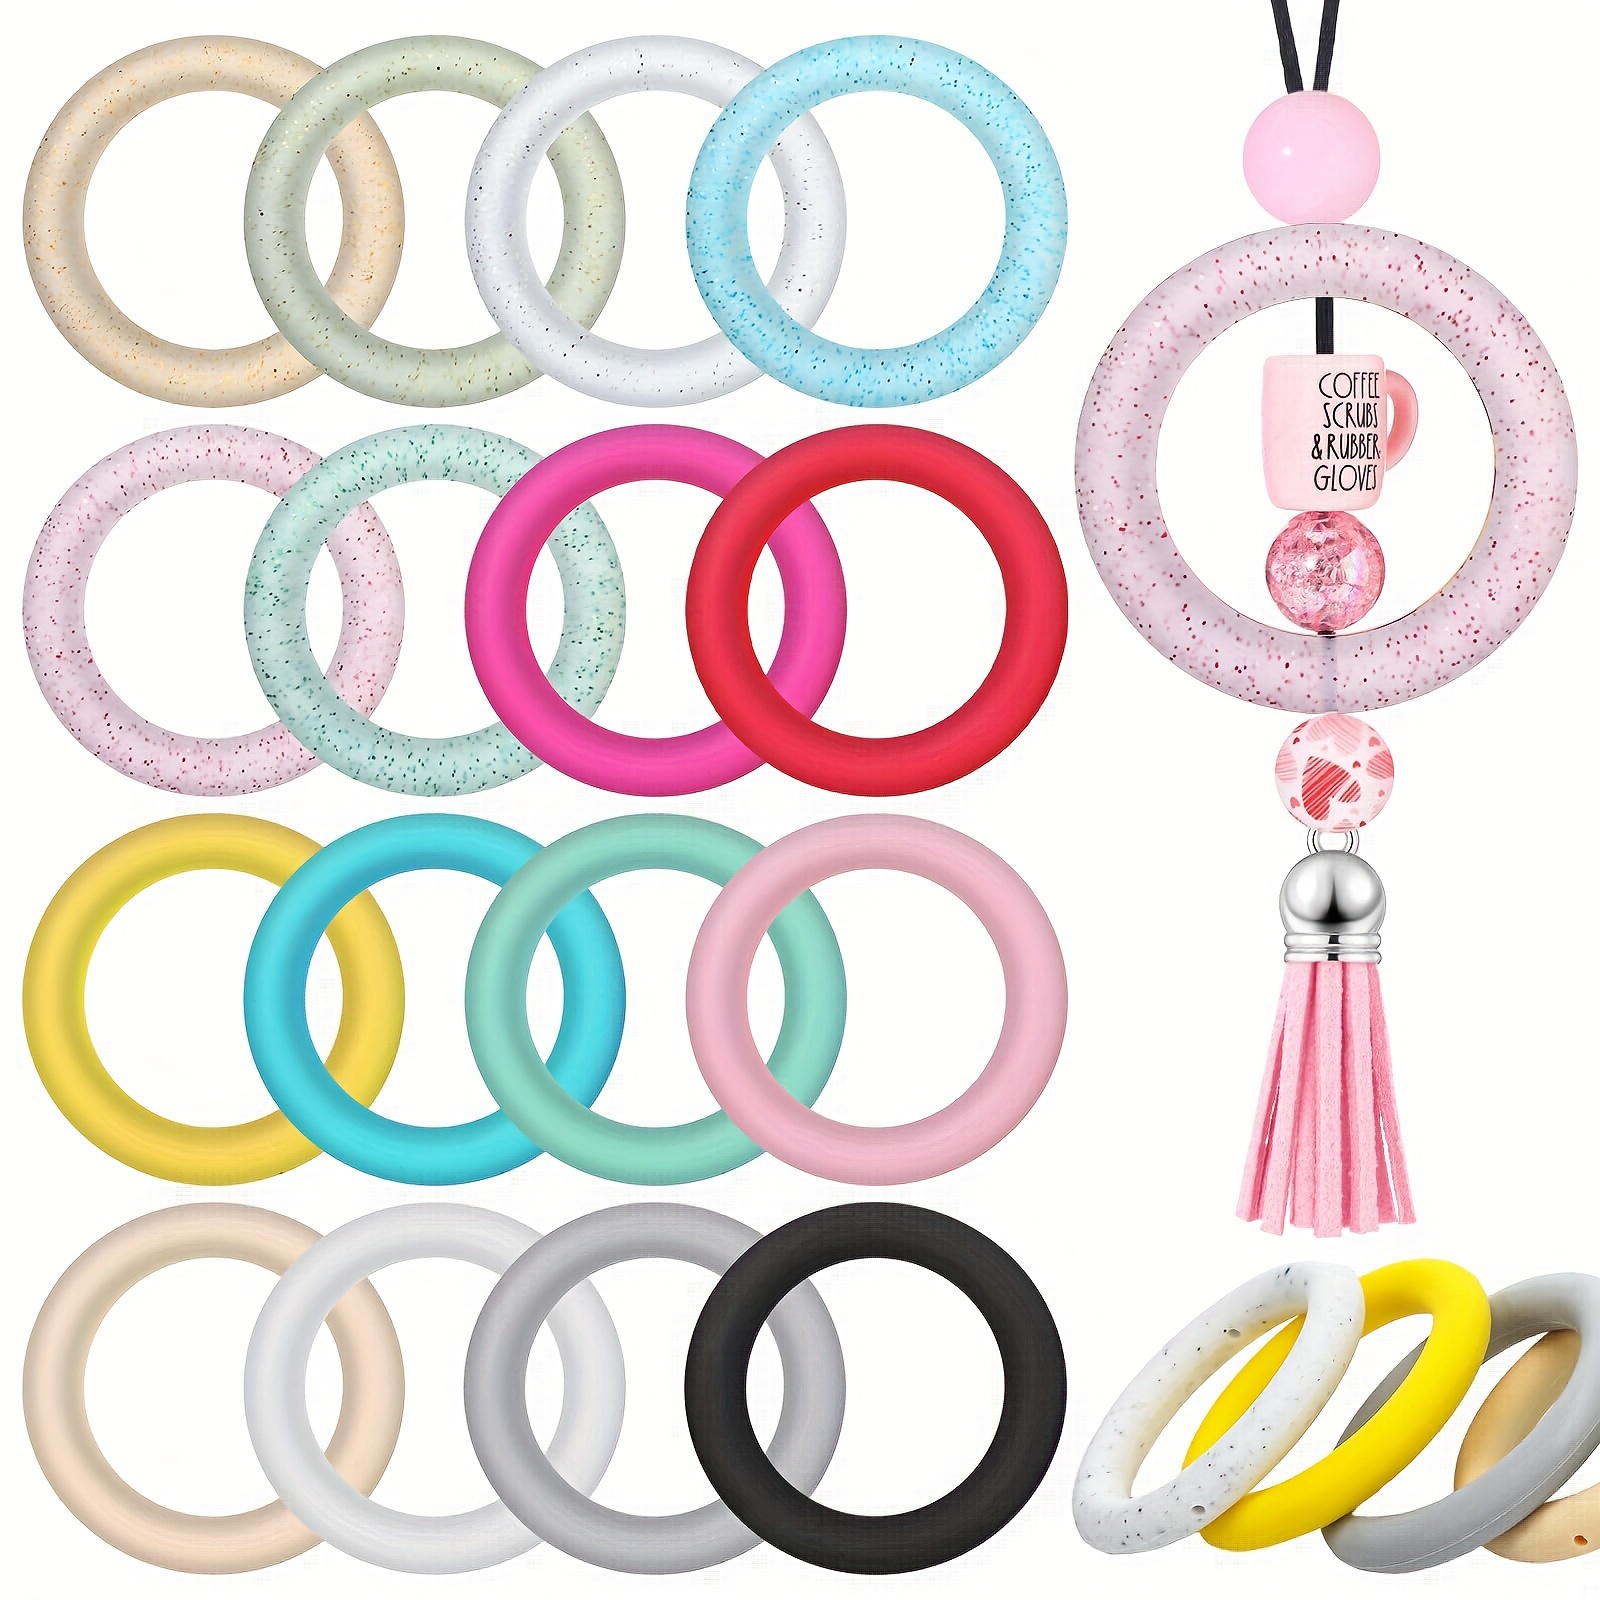 

16 Pcs 65mm Pastel Silicone Rings Set, Colorful Diy Craft Bangle Bracelet Making Kit With 3mm Ring Shape Silicone Beads, Premium Quality Jewelry Supplies, Stylish Accessories For Creative Gifts